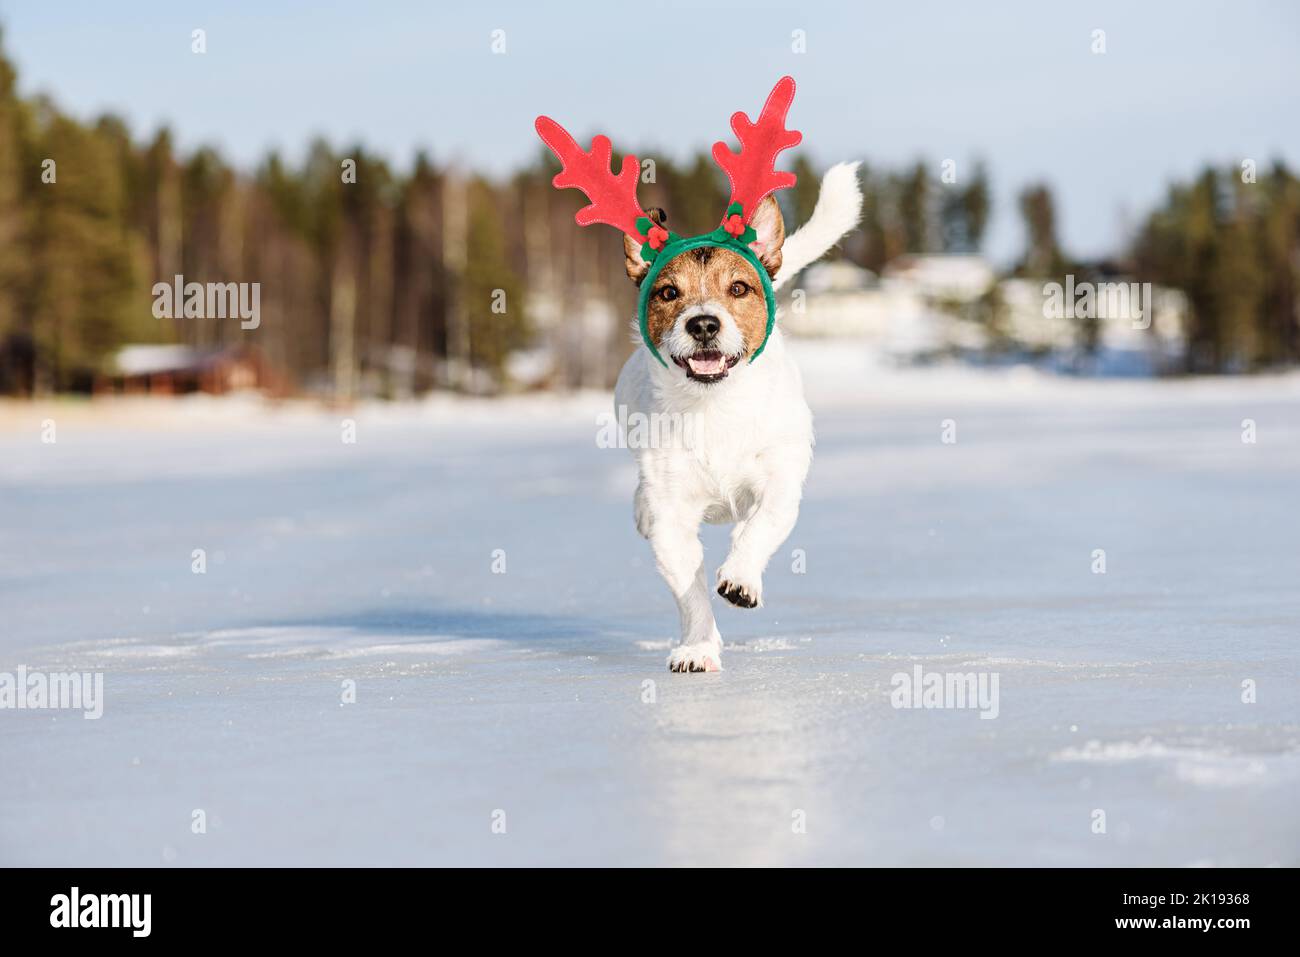 Funny dog wearing antlers of Christmas reindeer running in fairy winter scene. Background with holiday mood. Stock Photo